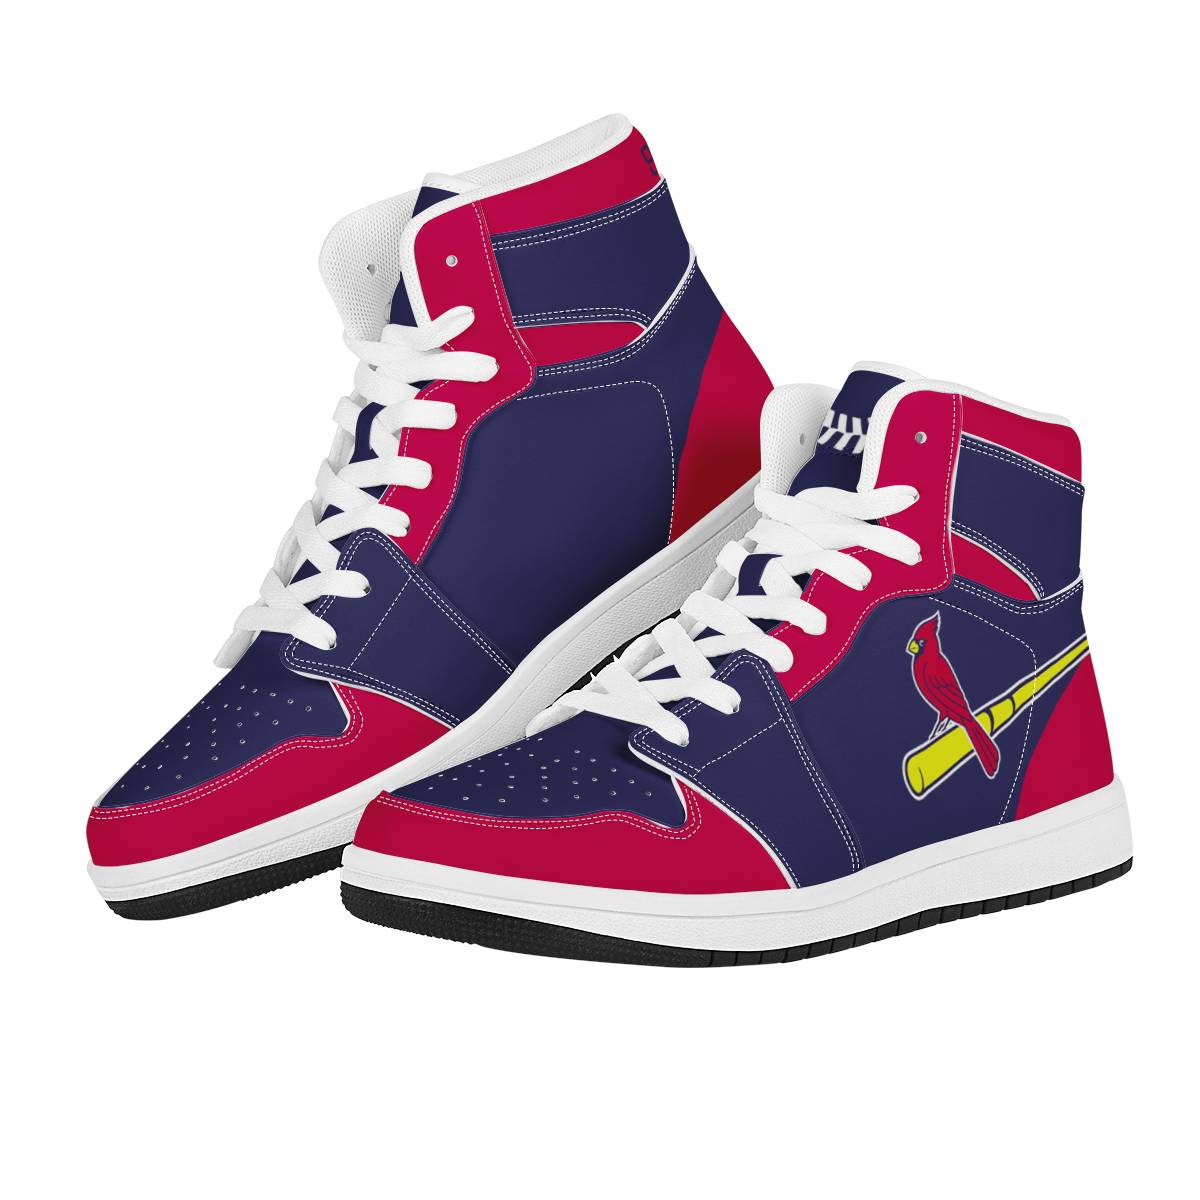 Women's St. Louis Cardinals High Top Leather AJ1 Sneakers 002